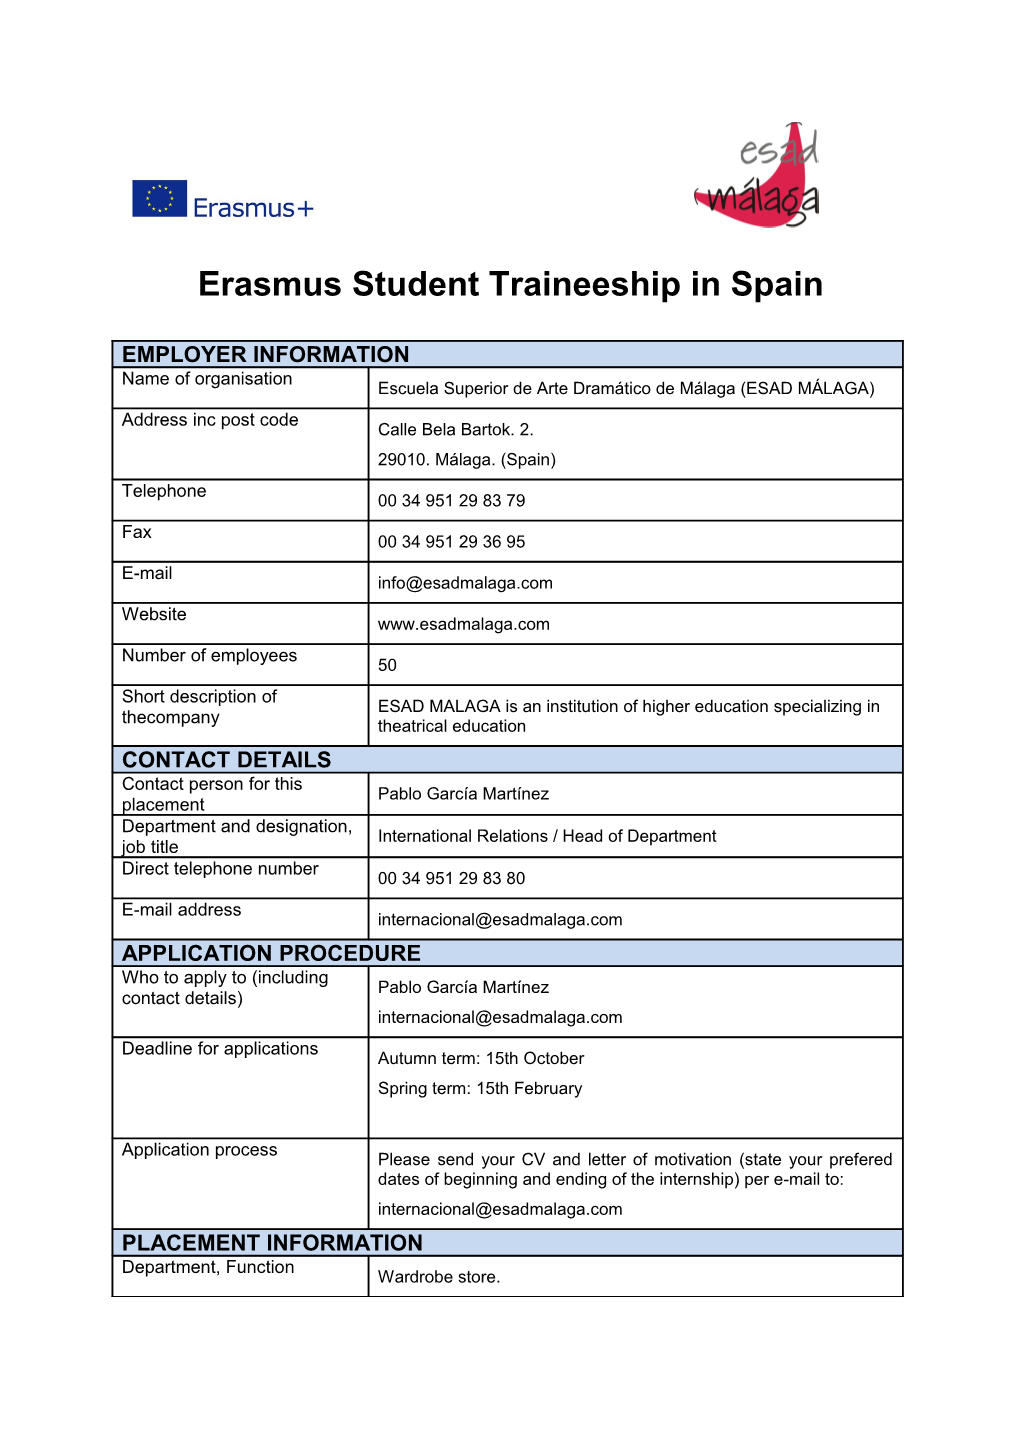 Erasmus Student Work Placement in the UK s6